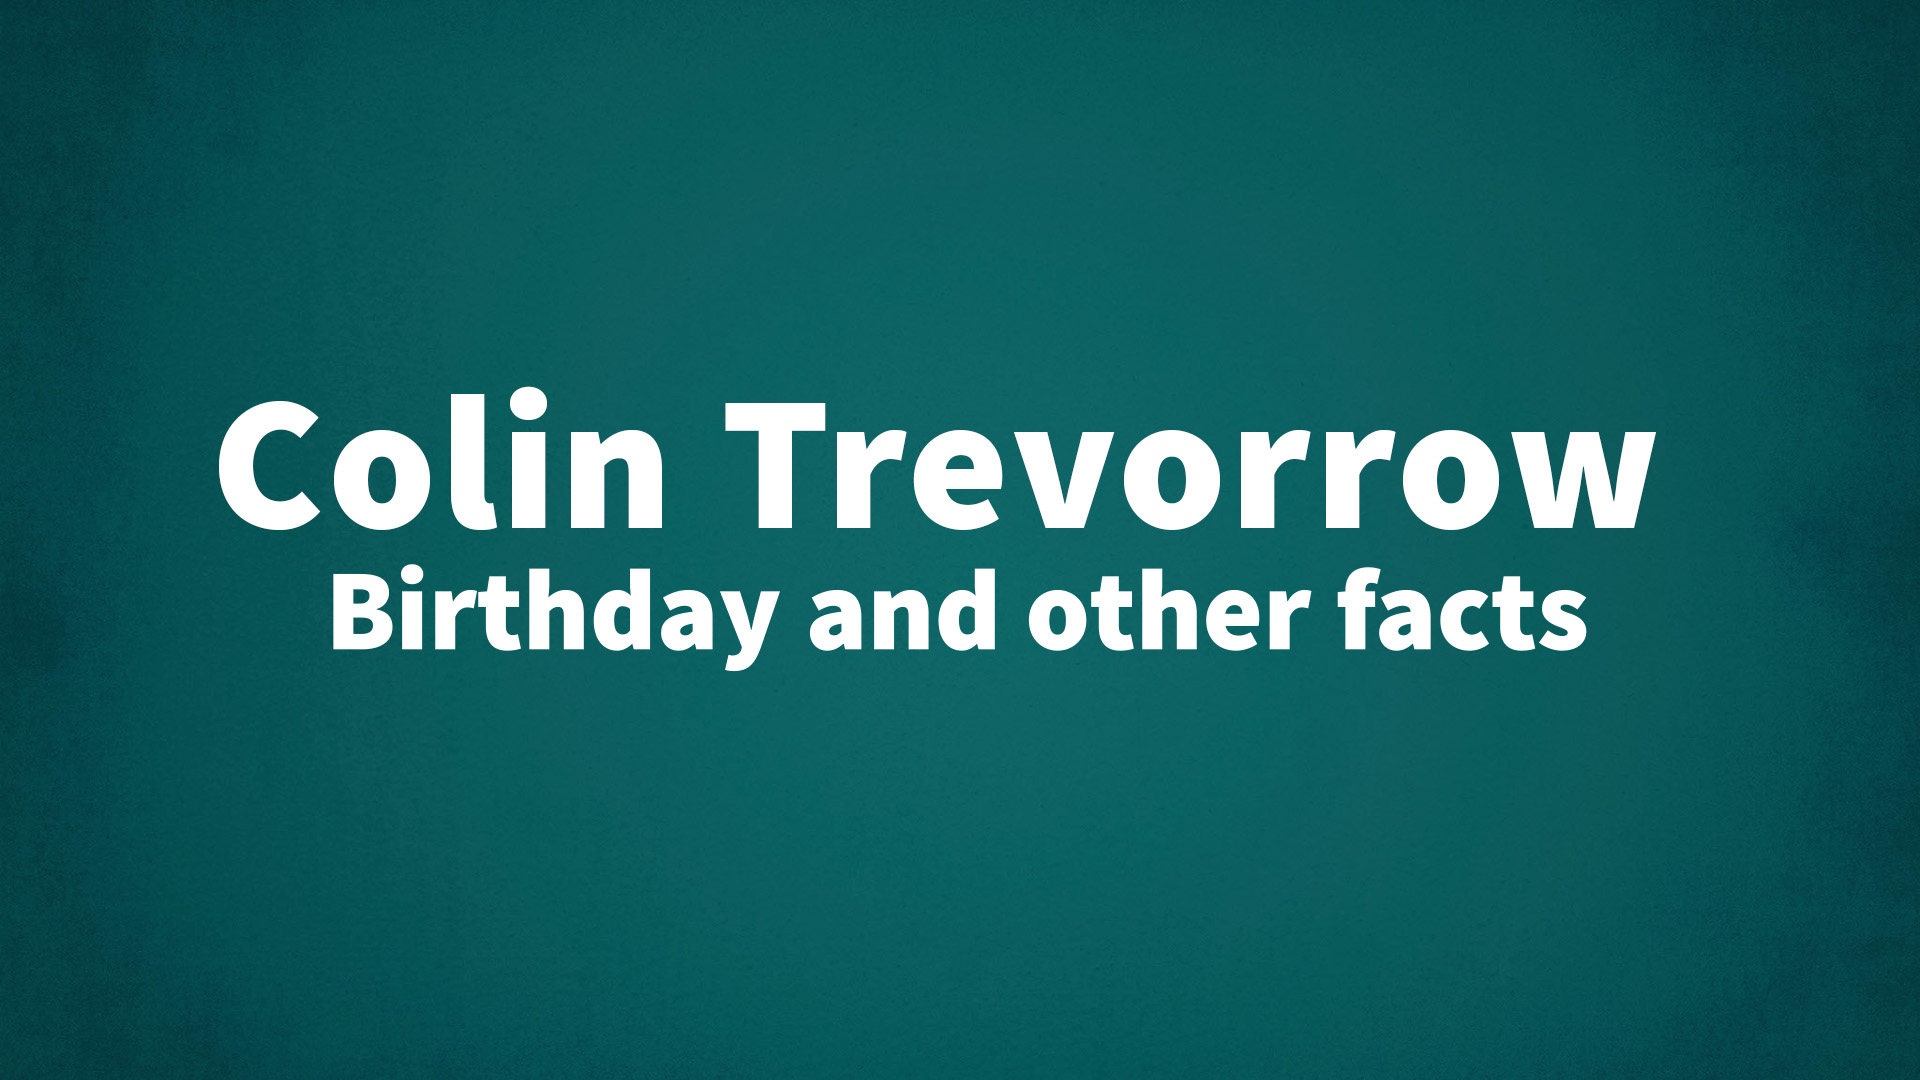 title image for Colin Trevorrow birthday